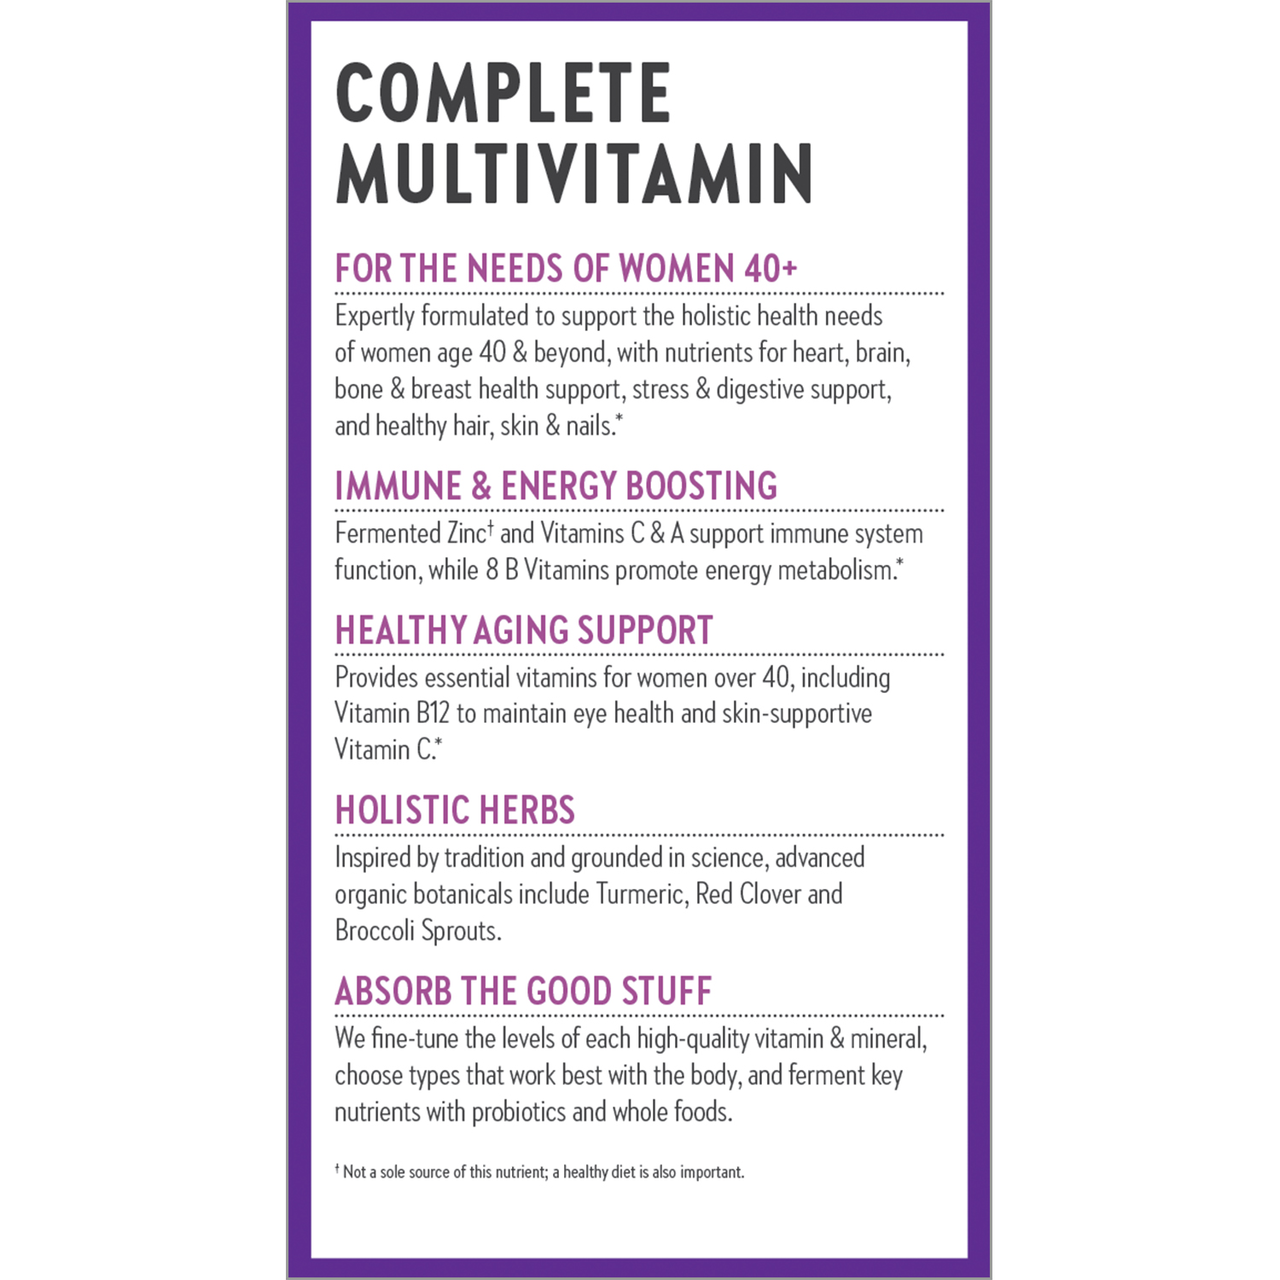 New Chapter Every Woman™'s One Daily 40+ Multivitamin